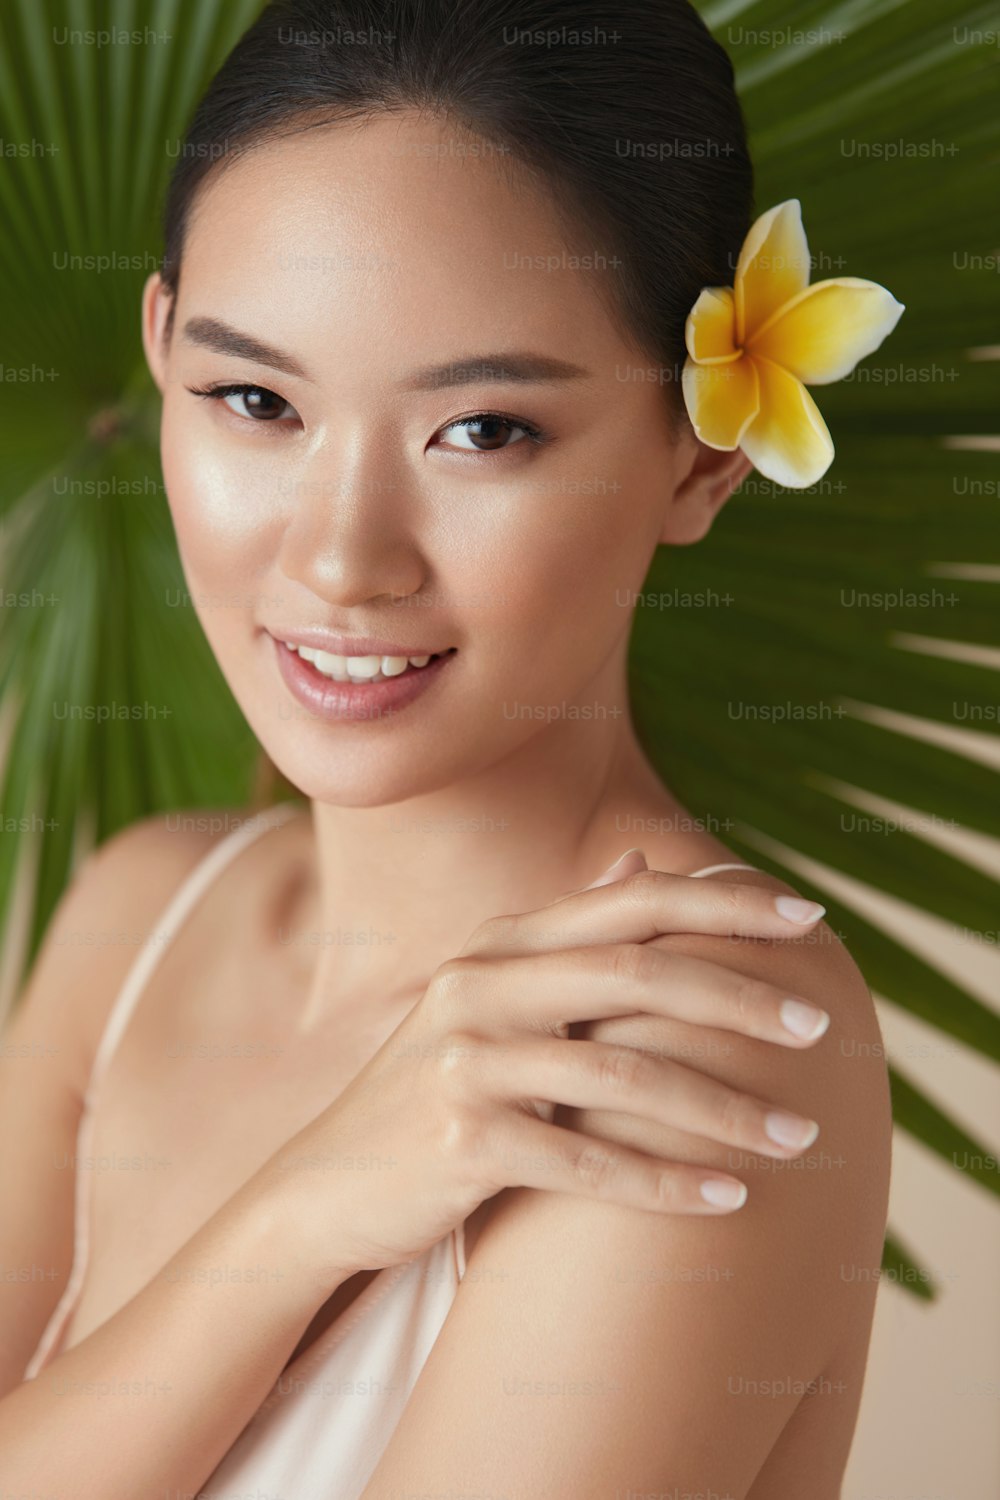 Beauty. Model Near Palm With Flower In Hair. Tender Asian Woman Touching Shoulder Portrait On Tropical Plant Background. Beautiful Girl Enjoying Hydrated Skin After Using Natural Organic Cosmetic.